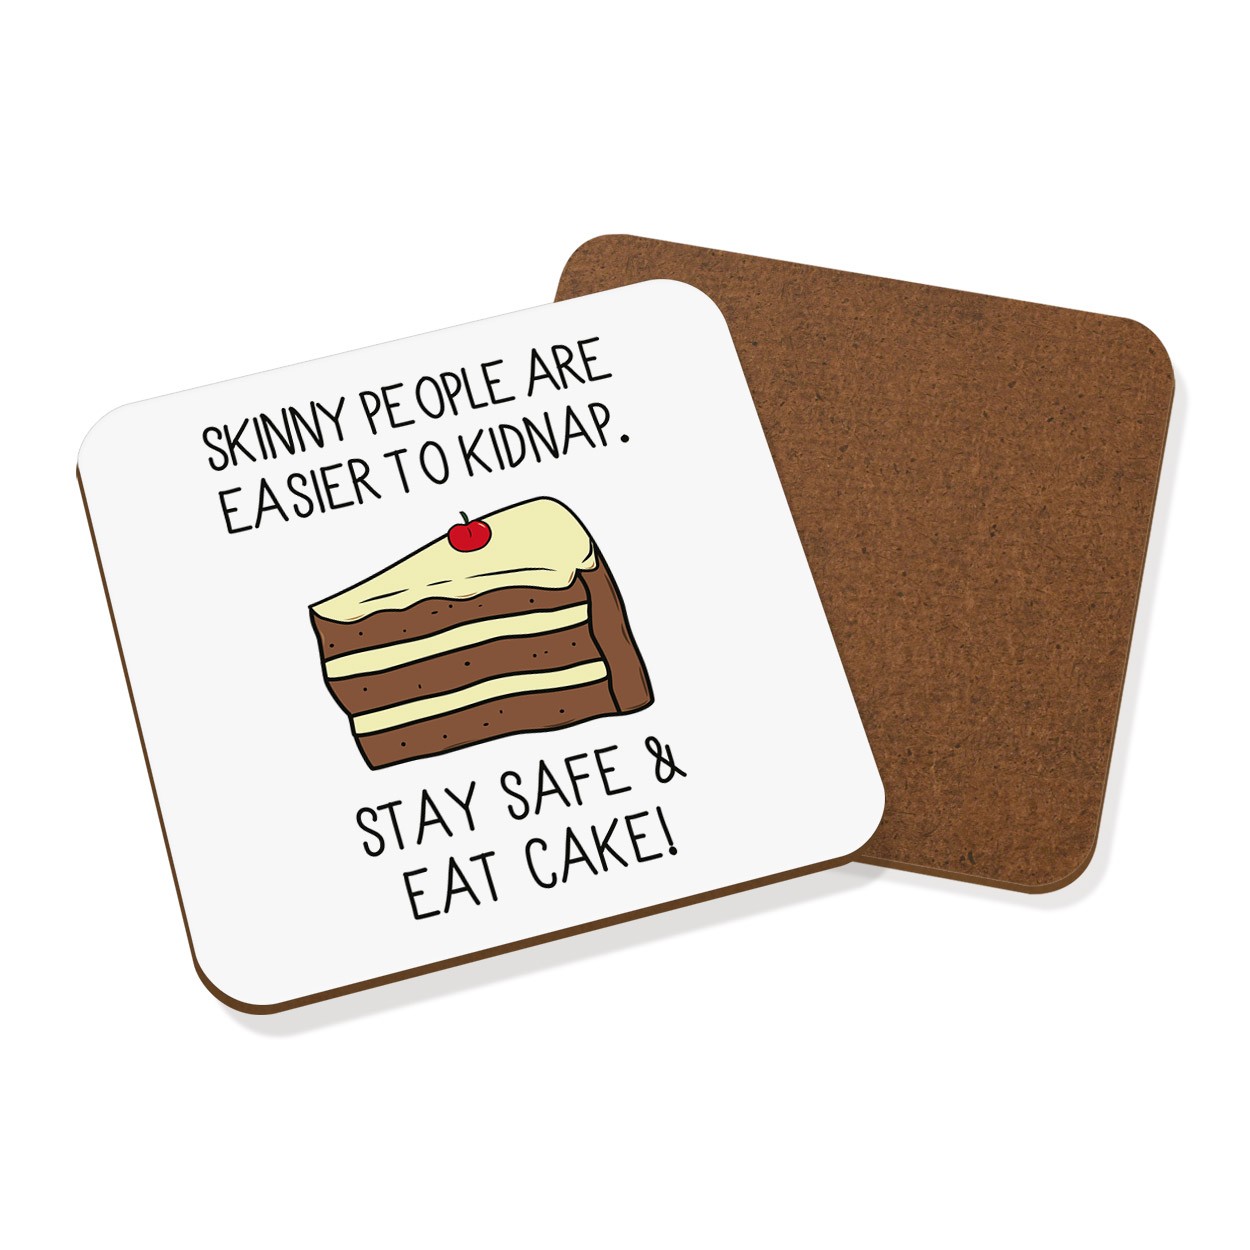 Skinny People Are Easier To Kidnap Stay Safe & Eat Cake Coaster Drinks Mat